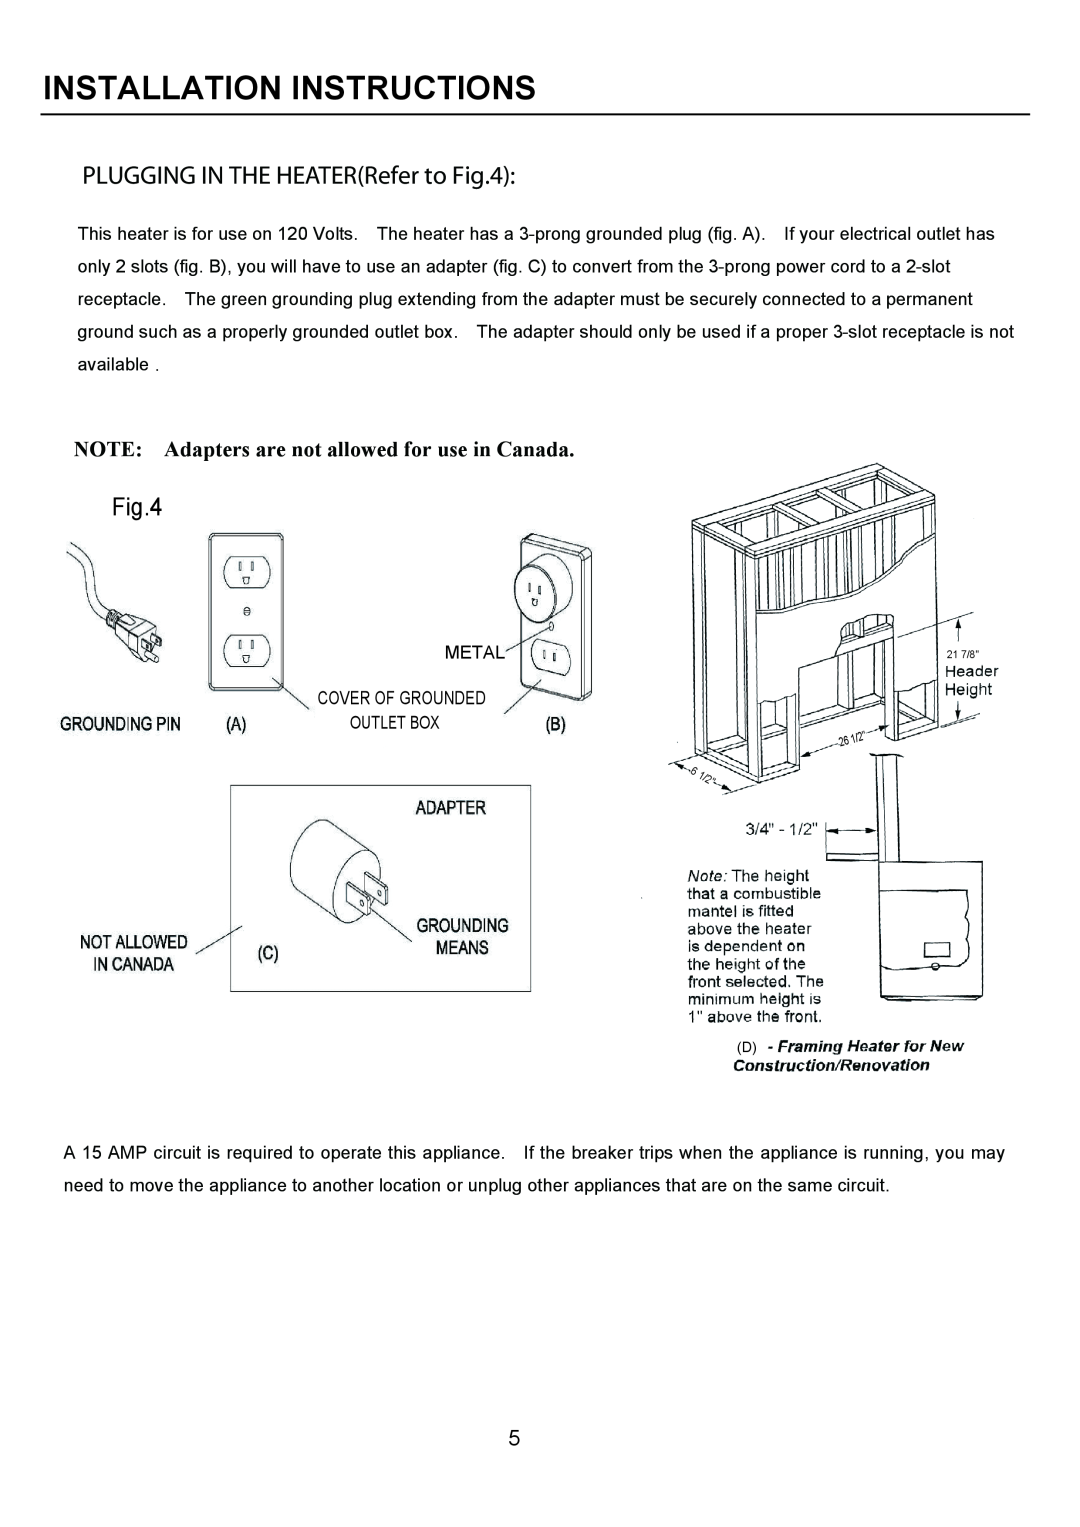 FMI FEF26 manual Installation Instructions, PLUGGING IN THE HEATERRefer to, NOTE Adapters are not allowed for use in Canada 